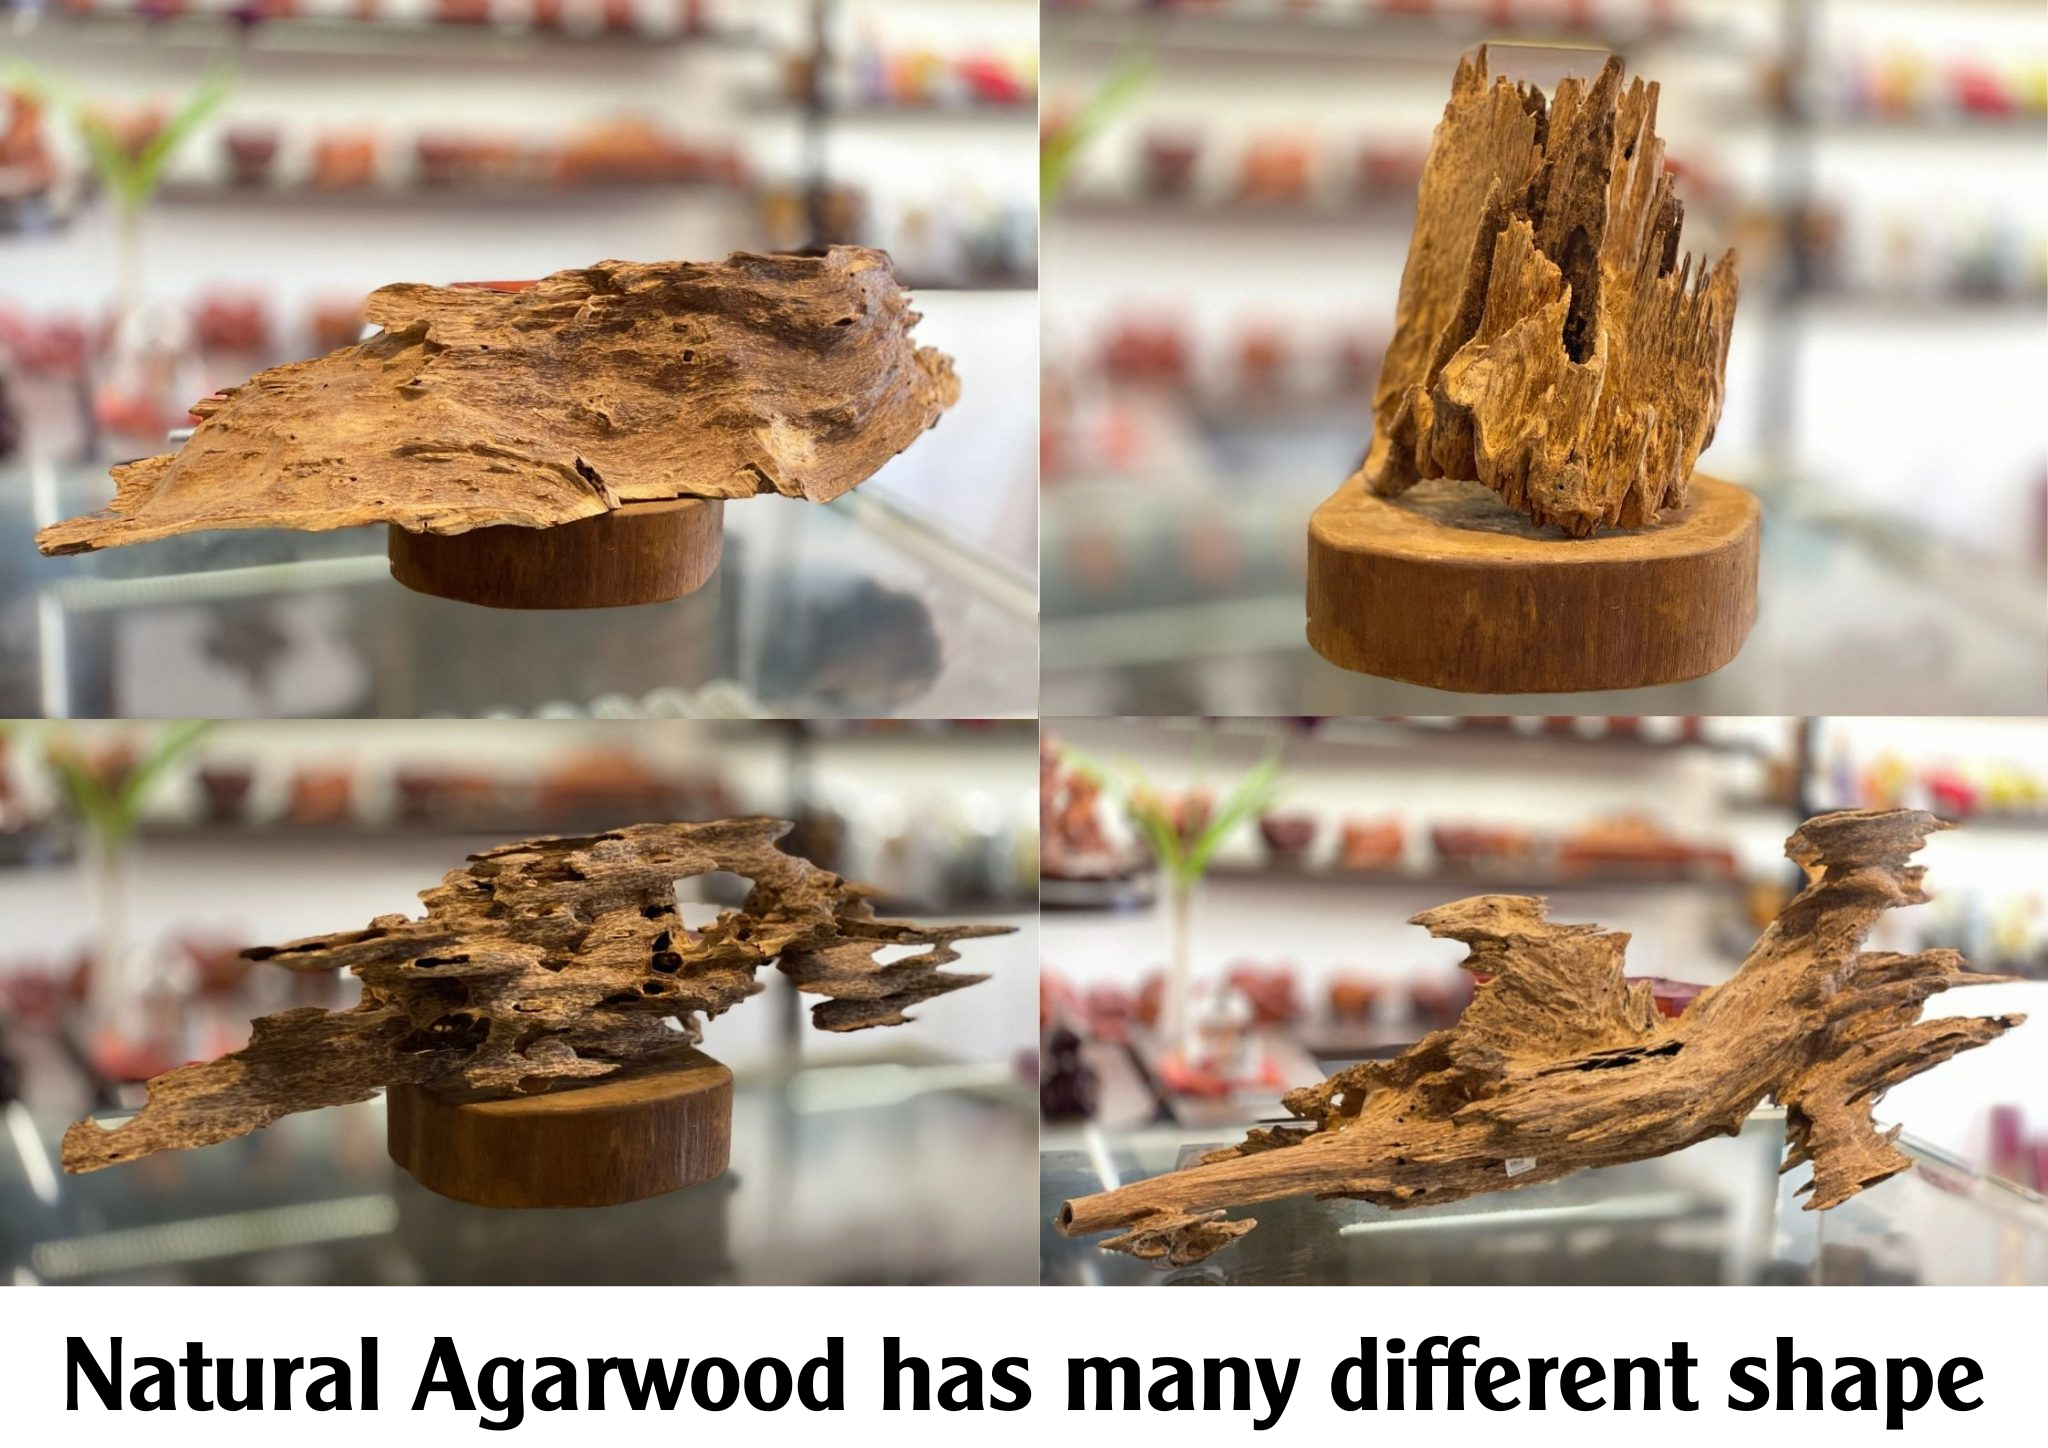 Agarwood Is Considered An Expensive Type Of Wood Because Of Its Rarity As Well As The Uses It Brings